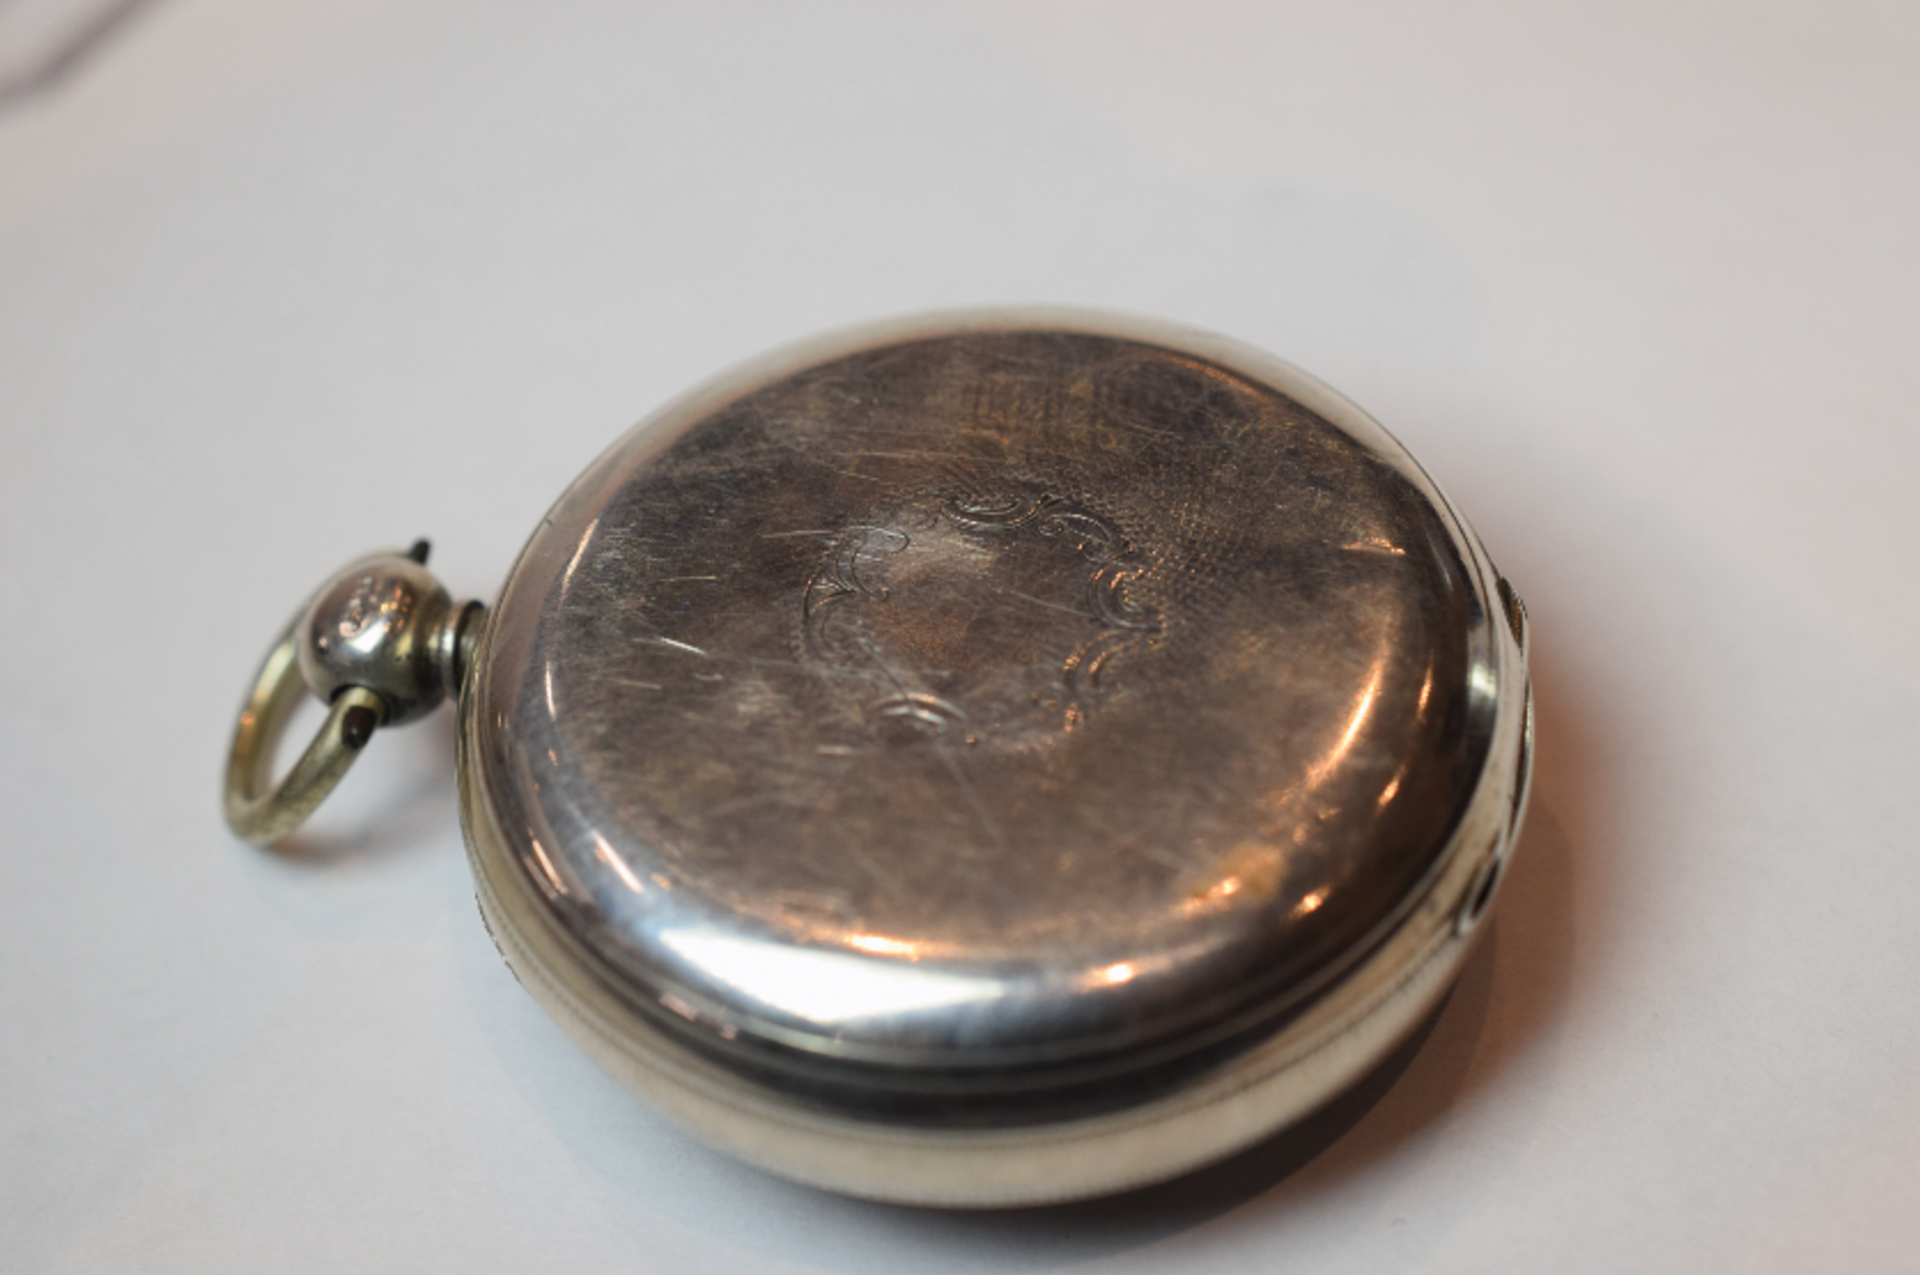 Open Face Silver Pocket Watch With Engraving Roman Numerals - Image 2 of 5